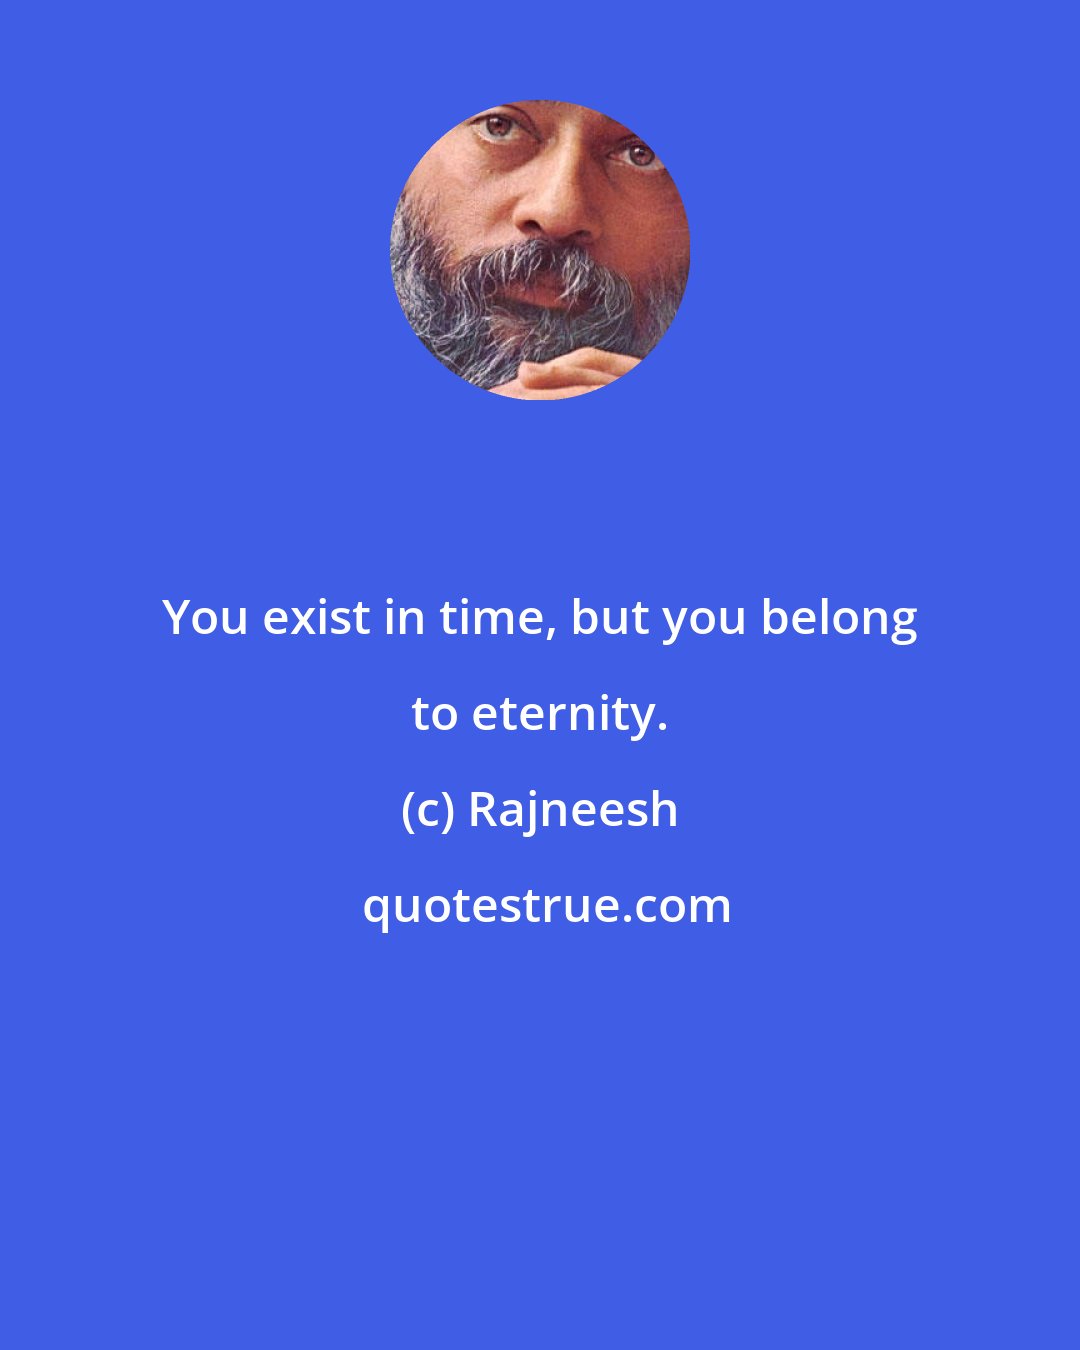 Rajneesh: You exist in time, but you belong to eternity.